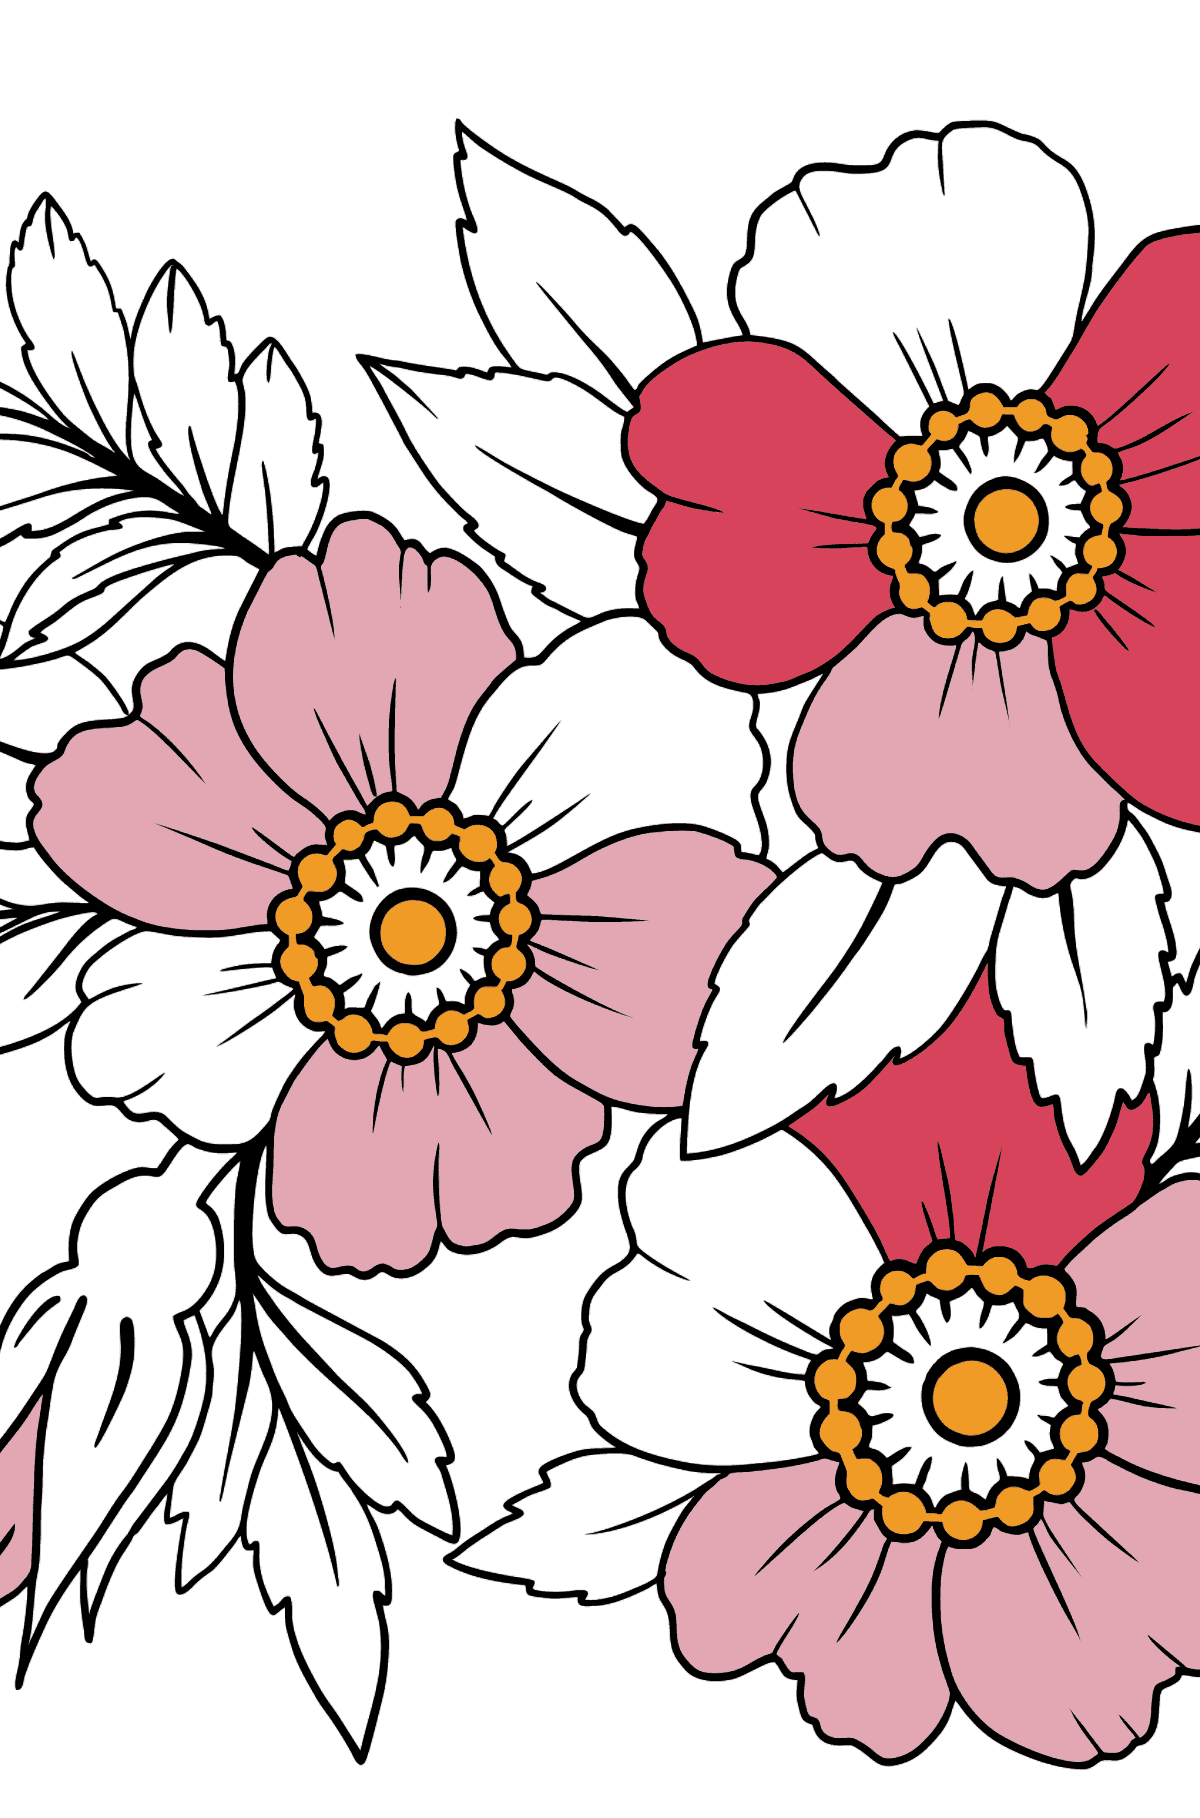 Flower Coloring Page - Japanese Velvet Anemone - Coloring Pages for Kids